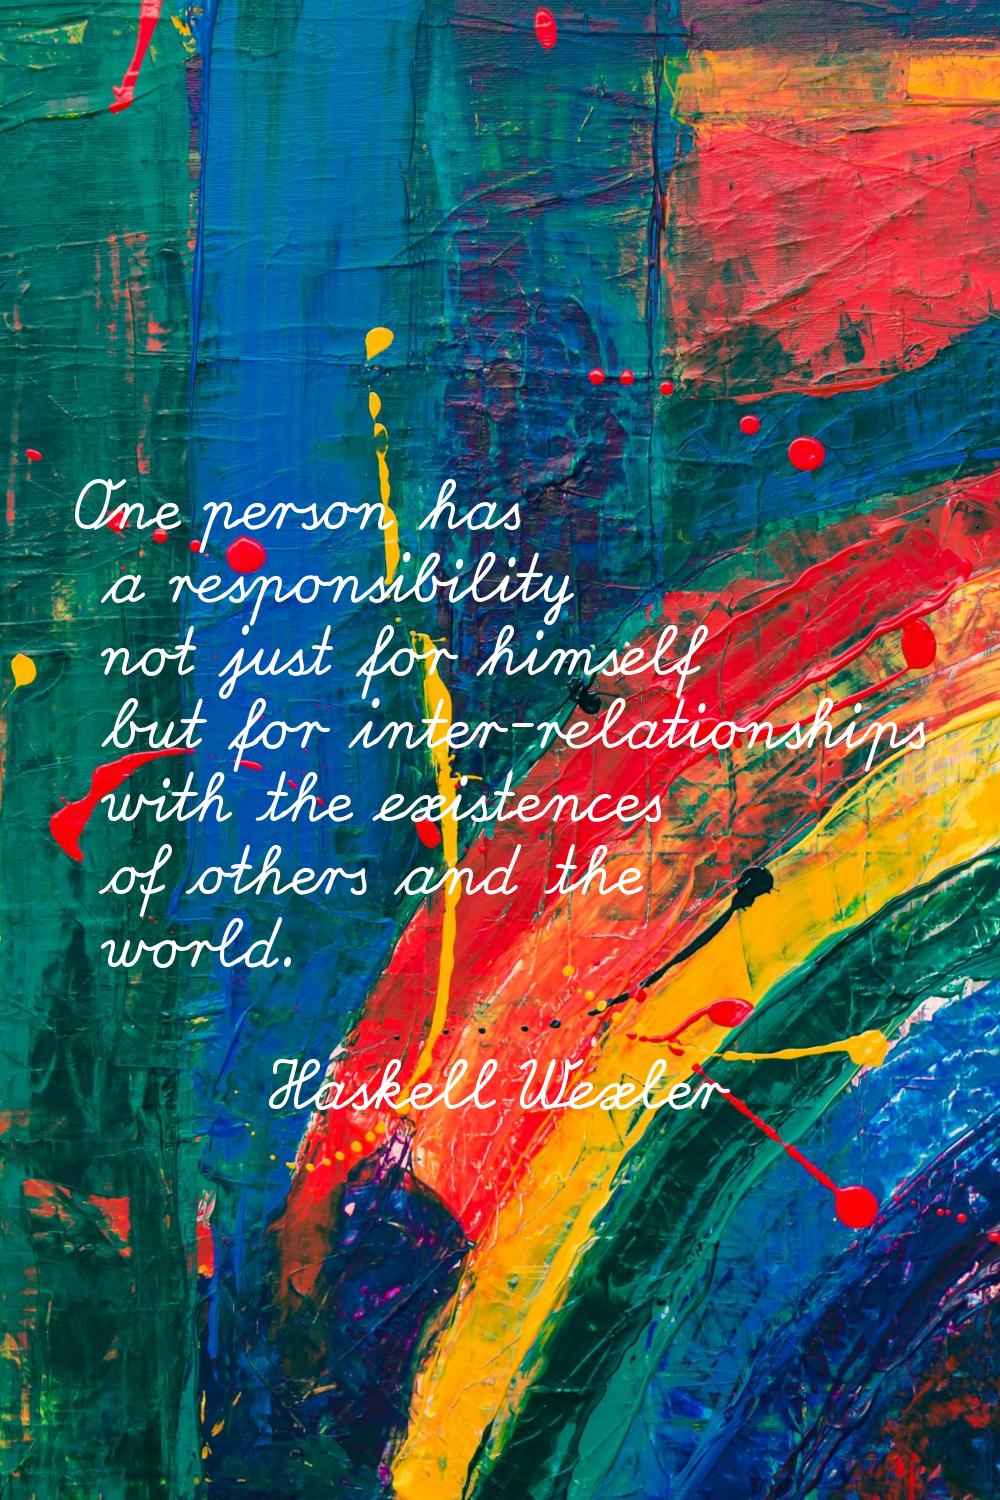 One person has a responsibility not just for himself but for inter-relationships with the existence